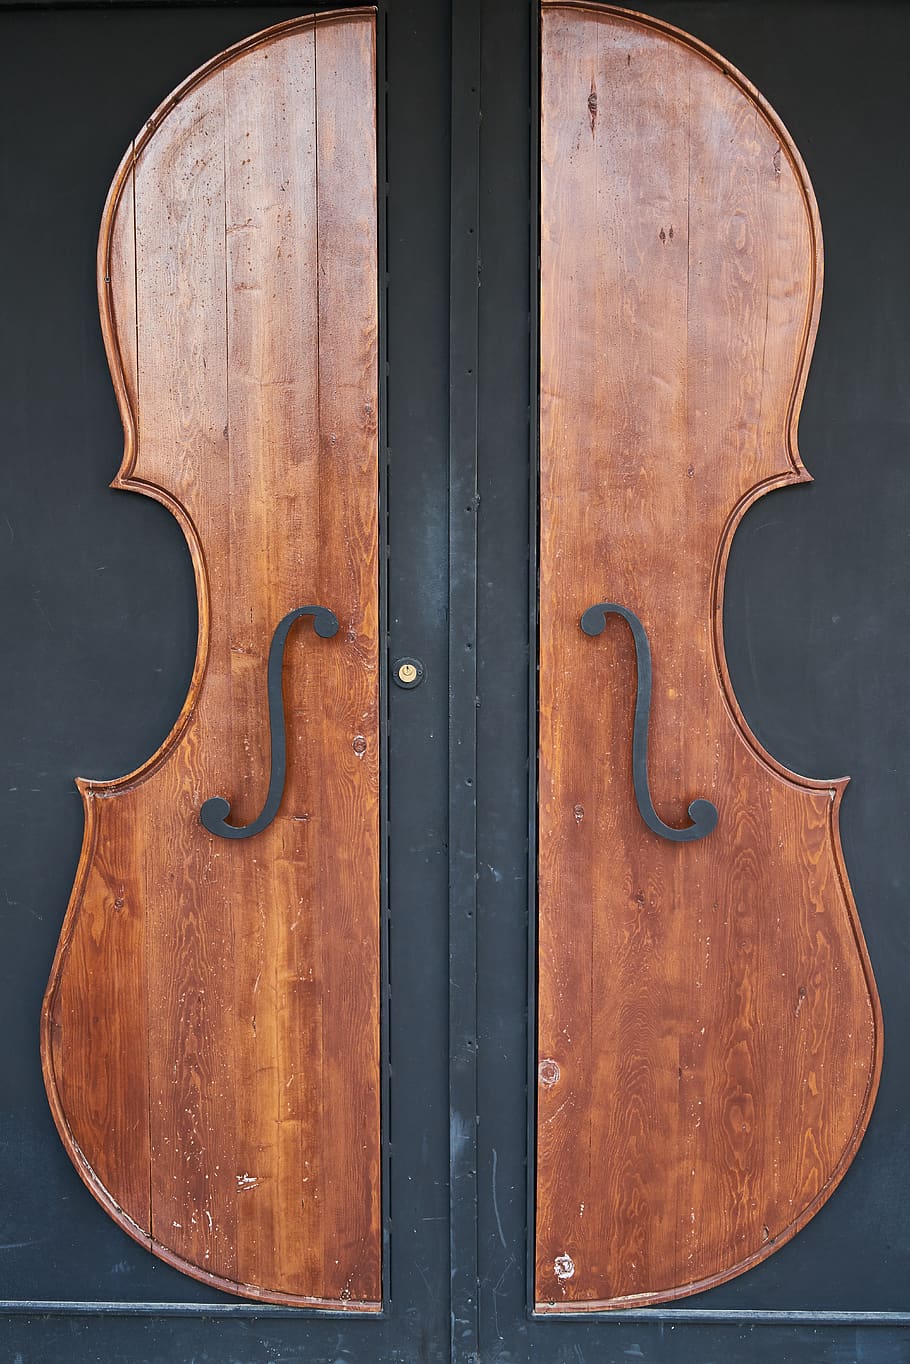 door, wood, background, building, home, violin, decor, old, introduction, architecture